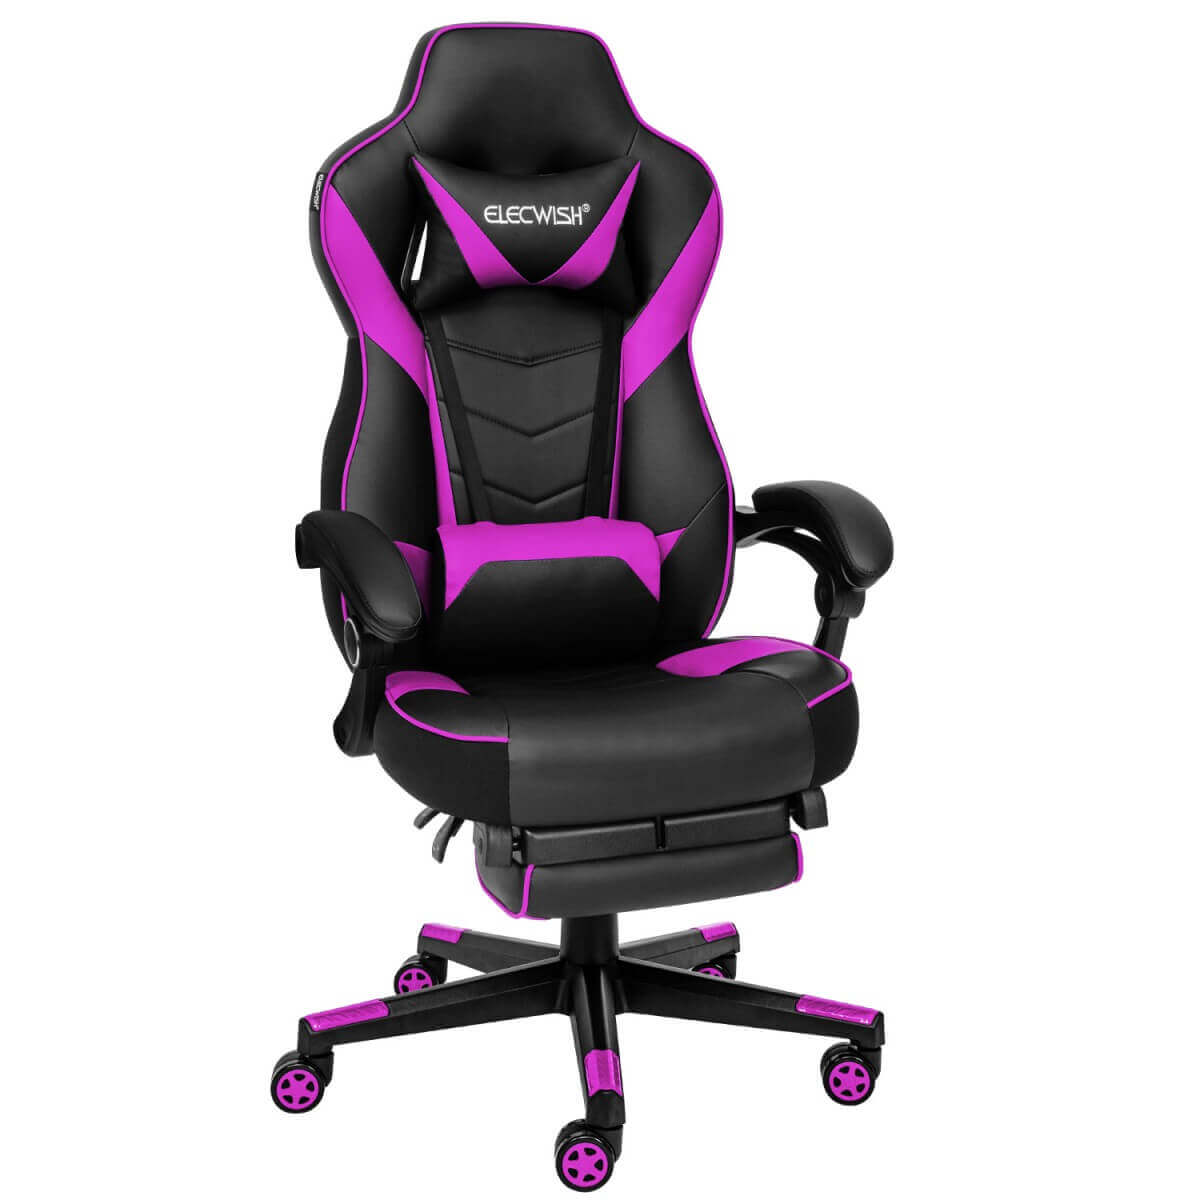 Elecwish Video Game Chairs Purple Gaming Chair With Footrest OC087